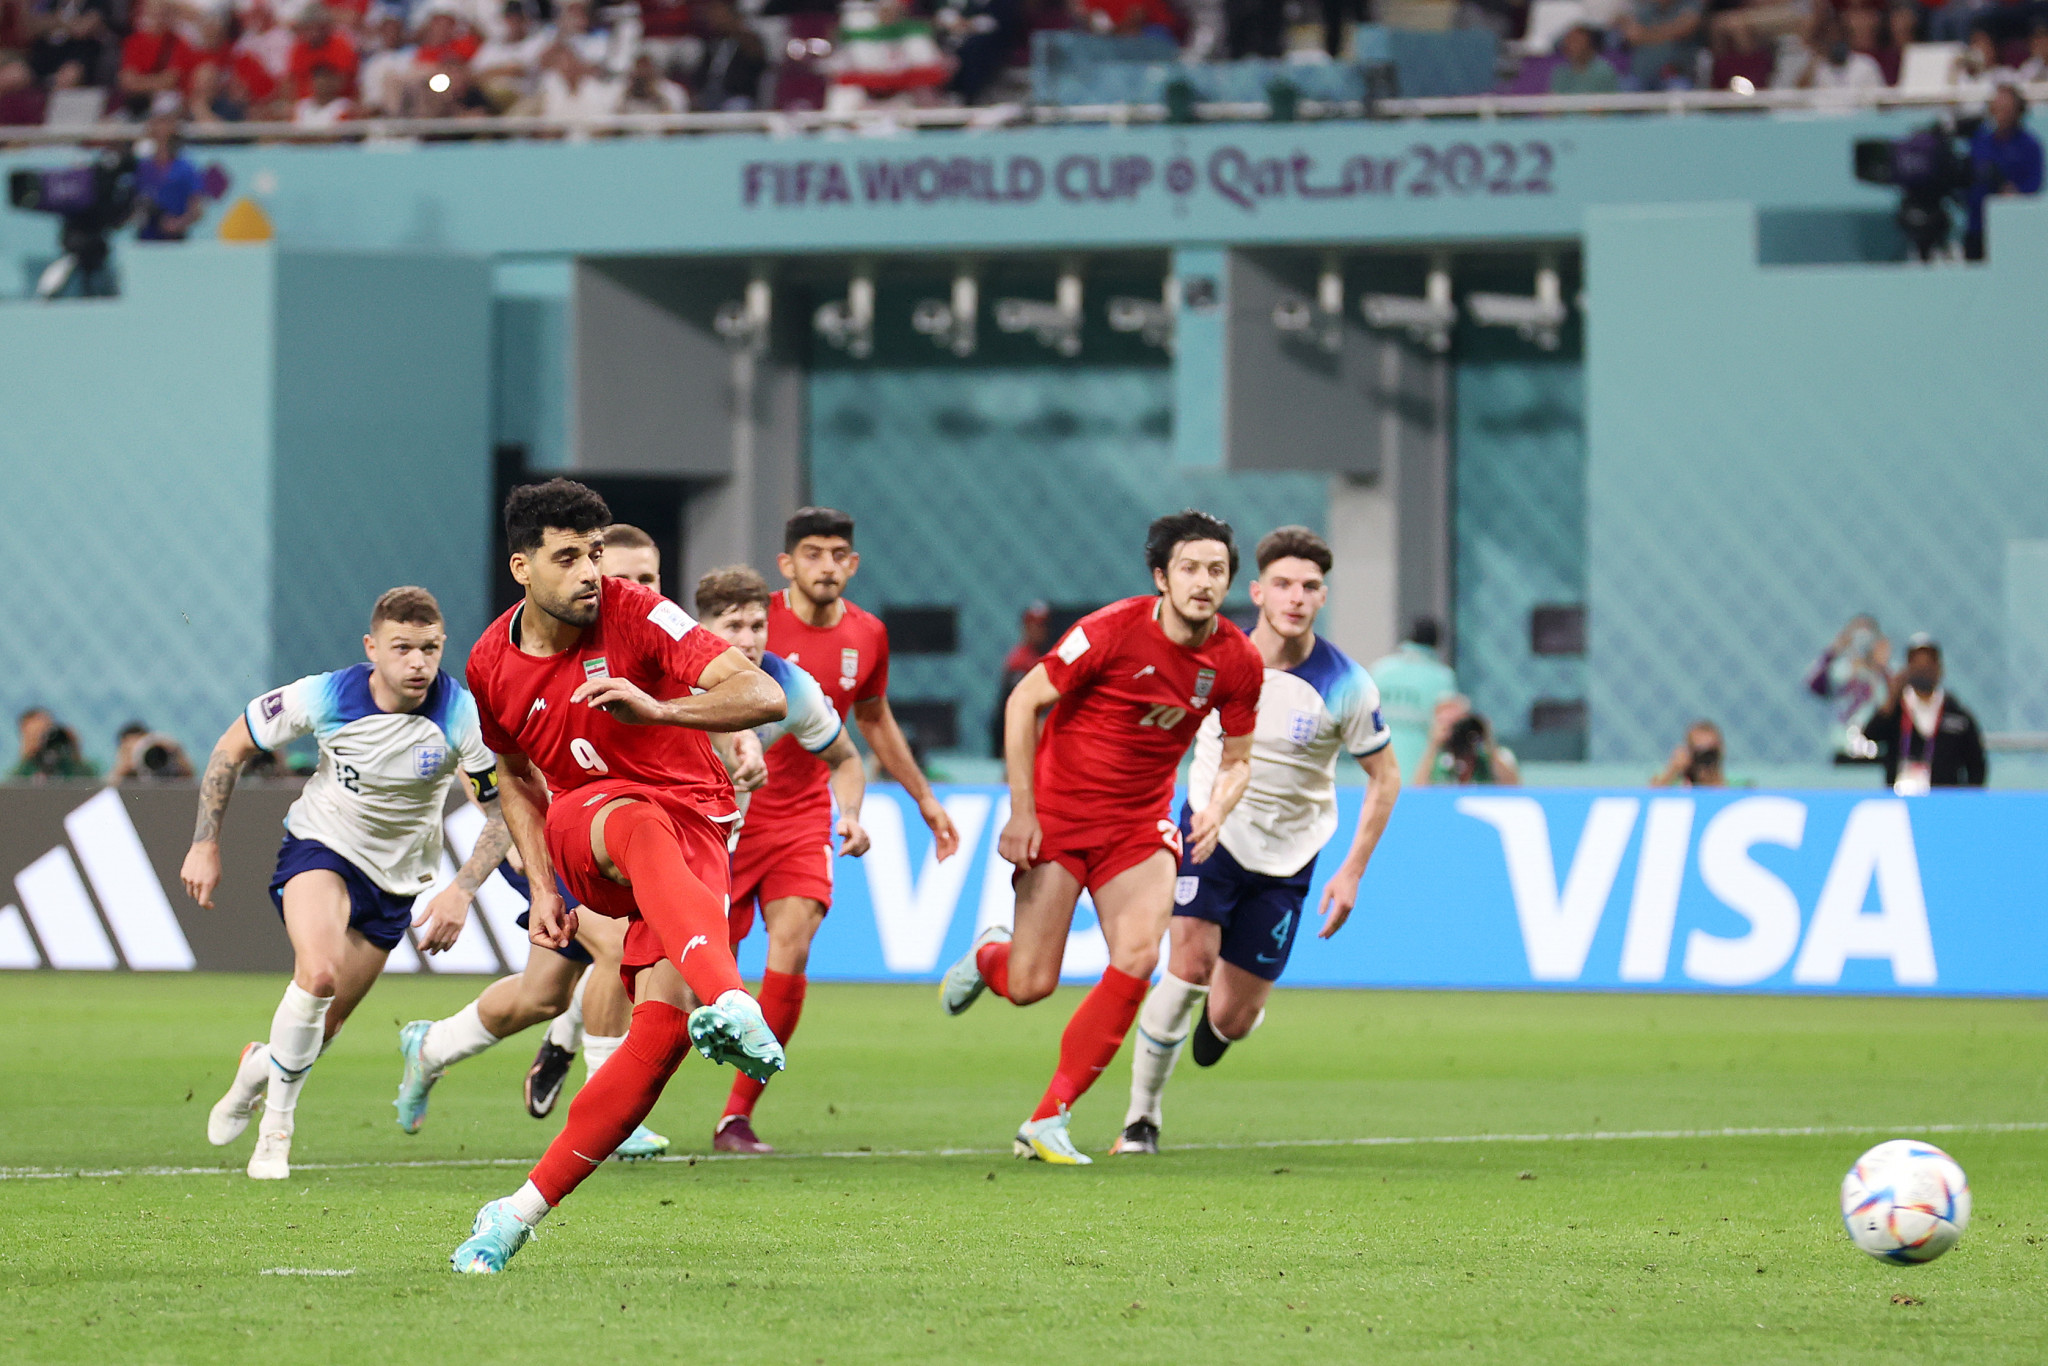 Mehdi Taremi then joined him following his spot kick which closed Iran's goal difference and ended the game 6-2 to Gareth Southgate's side ©Getty Images